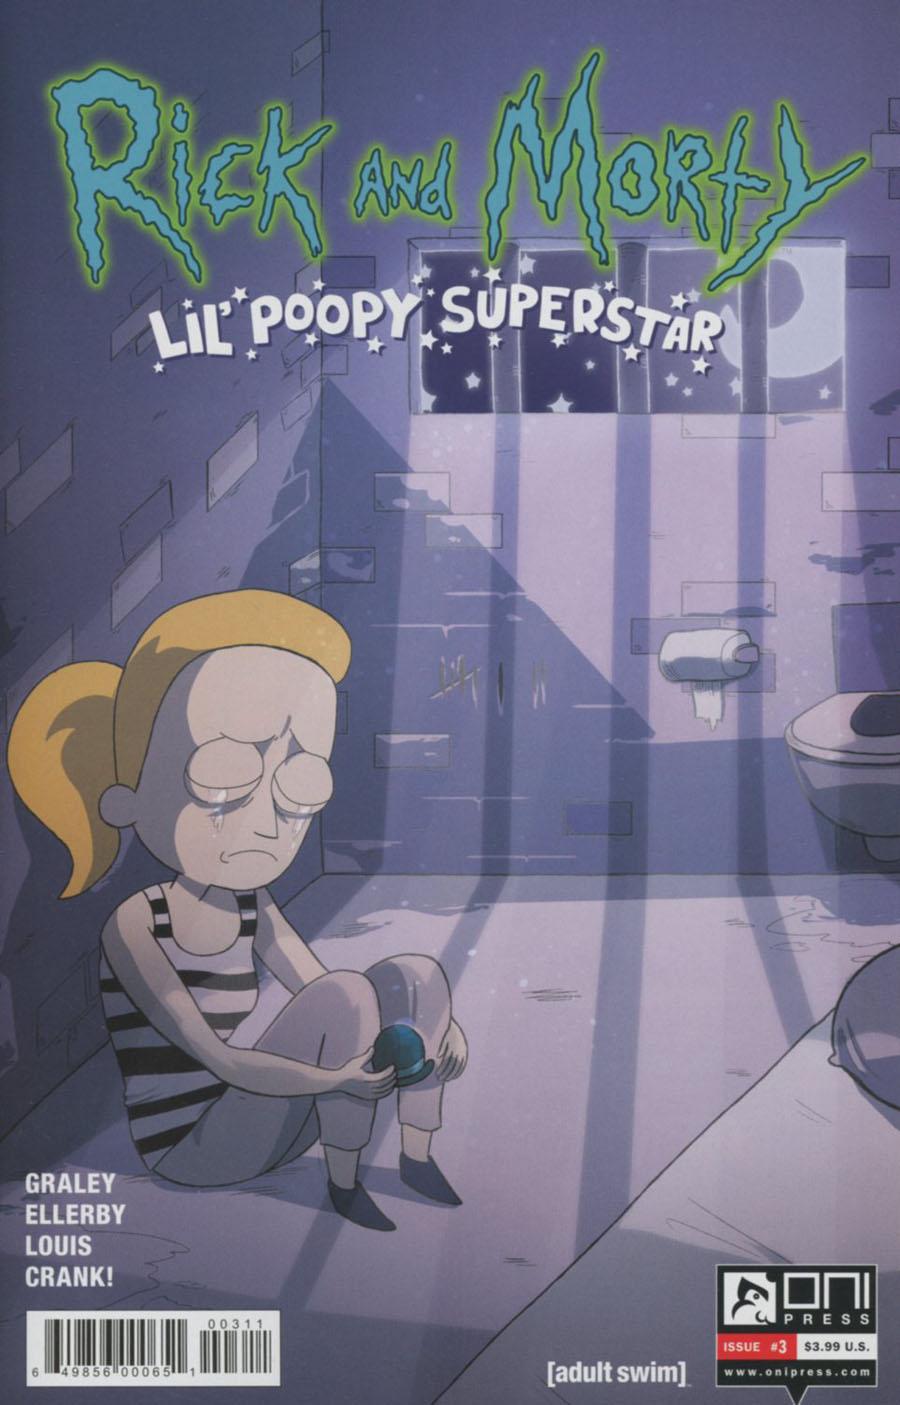 Rick And Morty Lil Poopy Superstar Vol. 1 #3